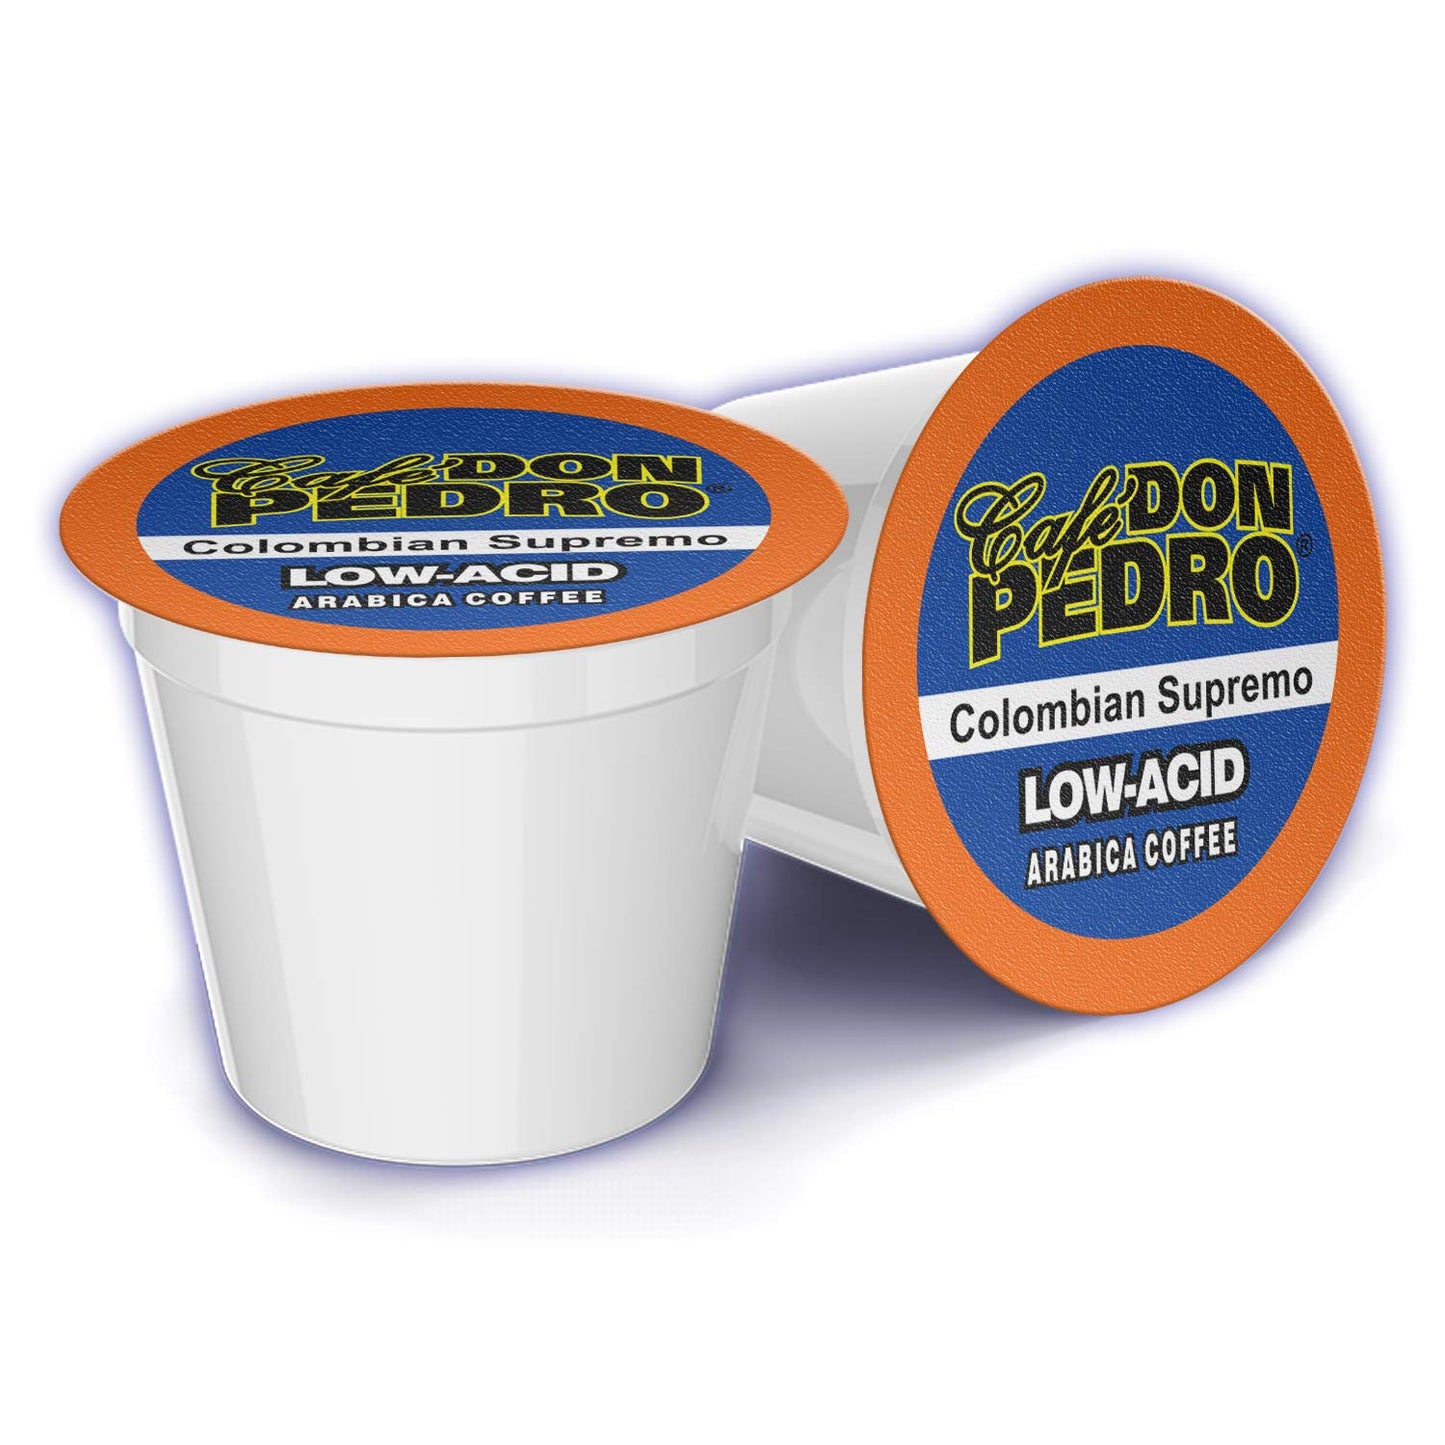 Try one Cafe Don Pedro Low-Acid Single Serve Coffee Pods, 12 ct. For Keurig K-cup maker